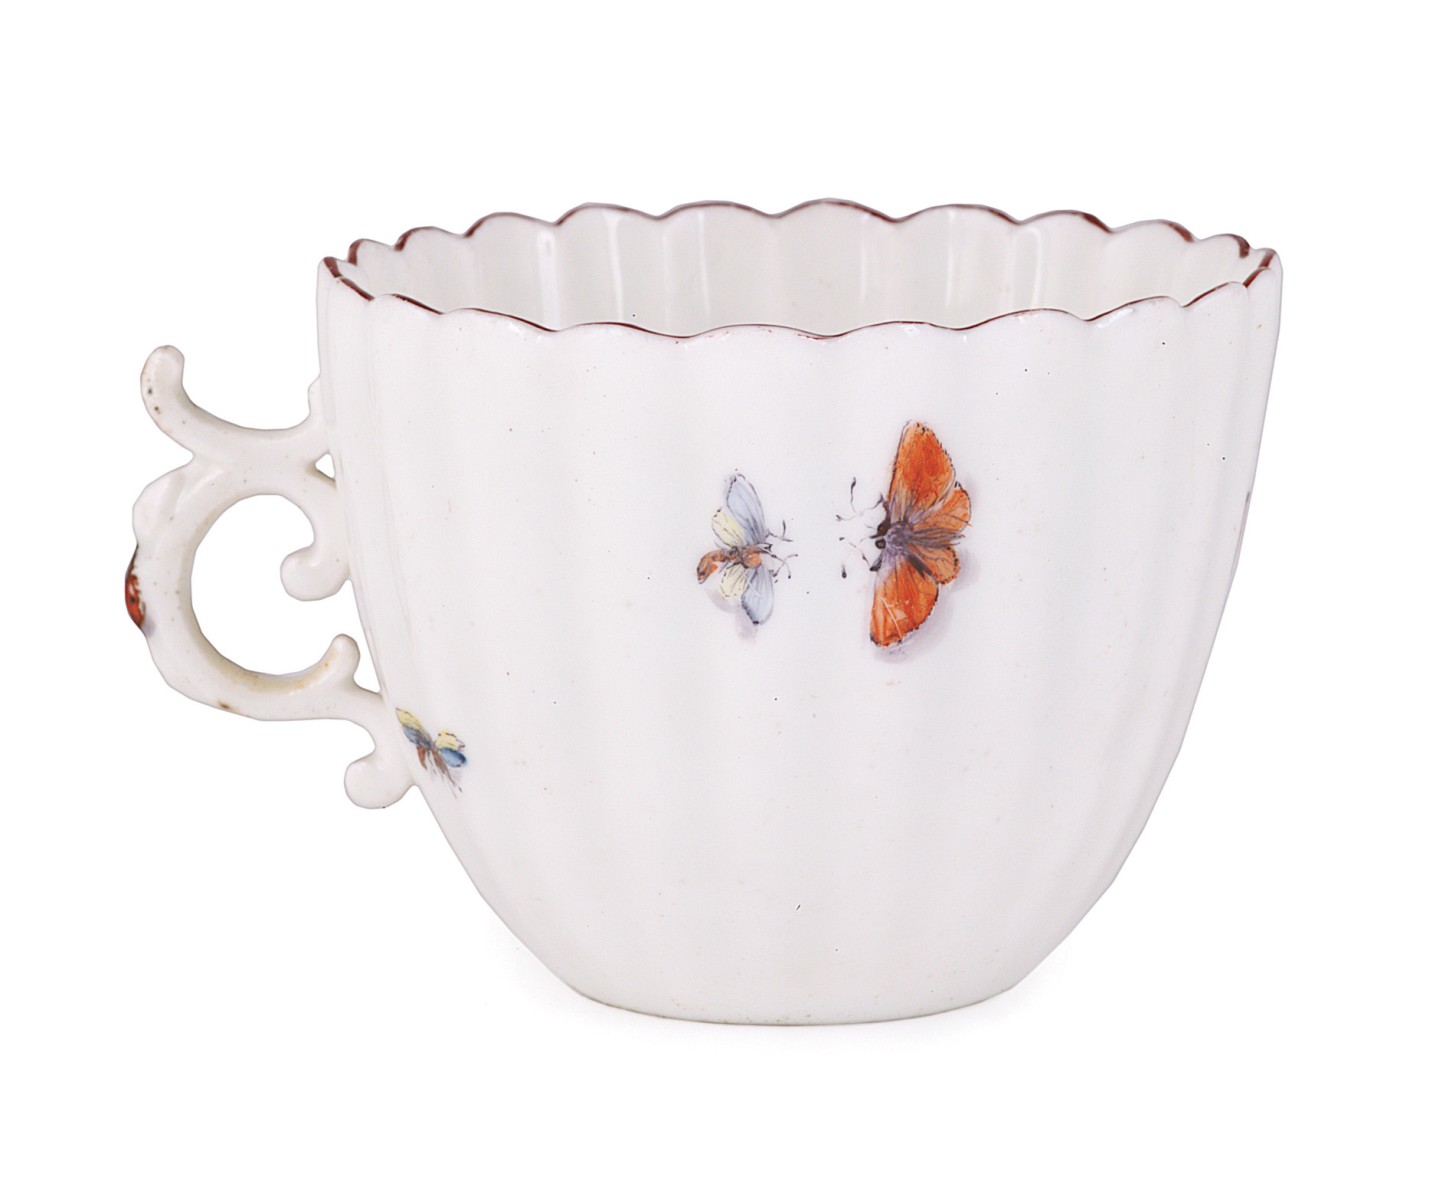 A CHELSEA FLUTED COFFEE CUP, CIRCA 1753-55 painted on the exterior with scattered insects, the